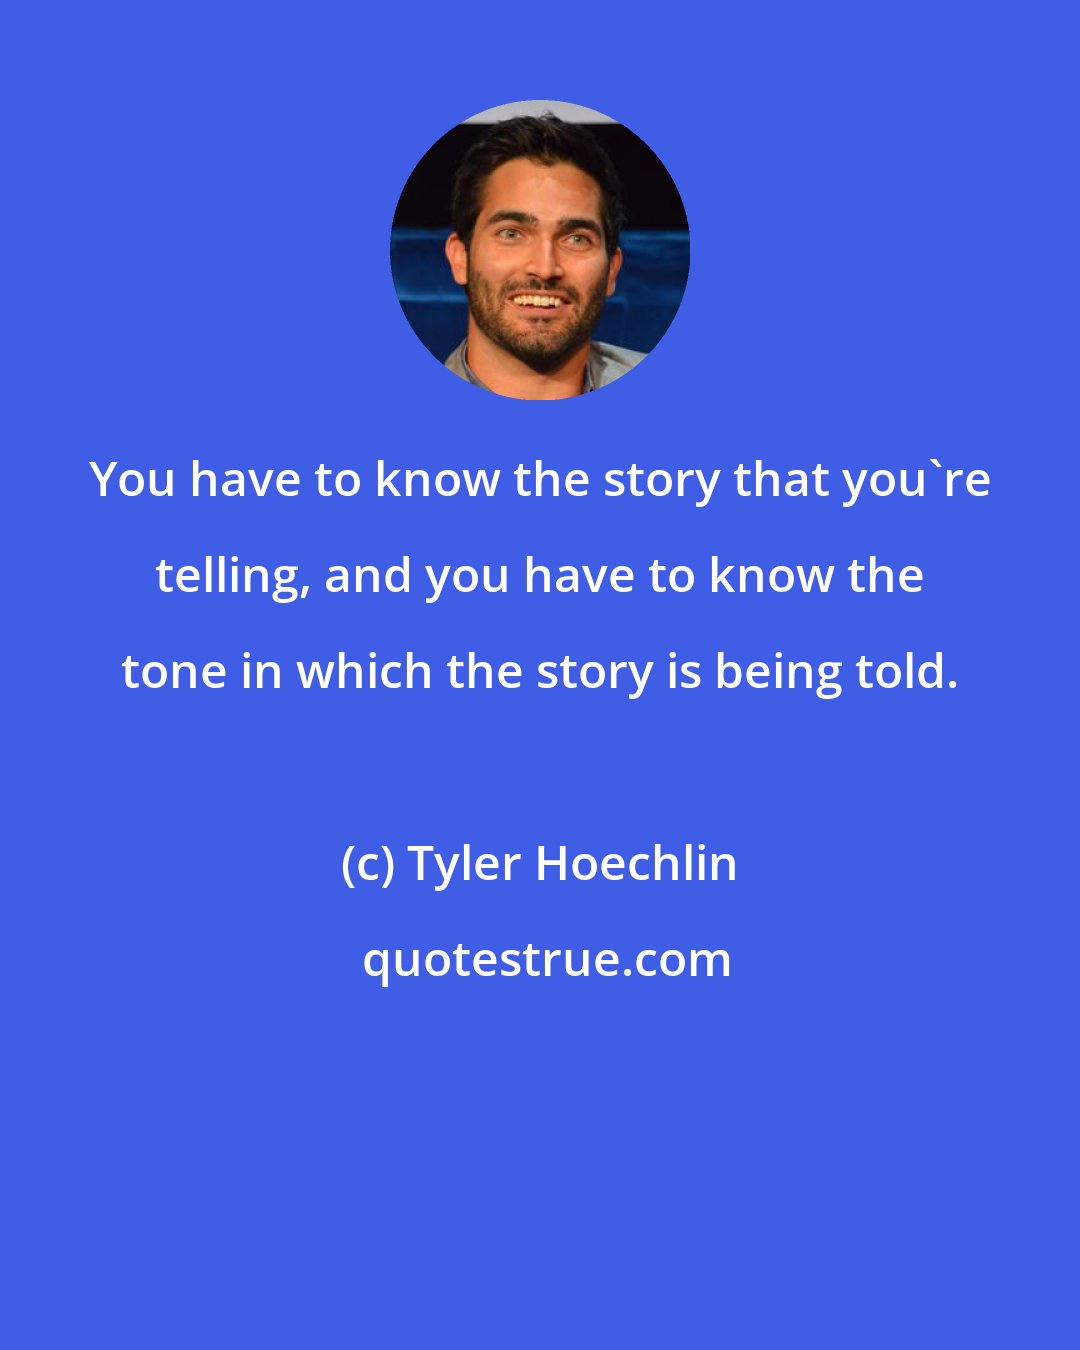 Tyler Hoechlin: You have to know the story that you're telling, and you have to know the tone in which the story is being told.